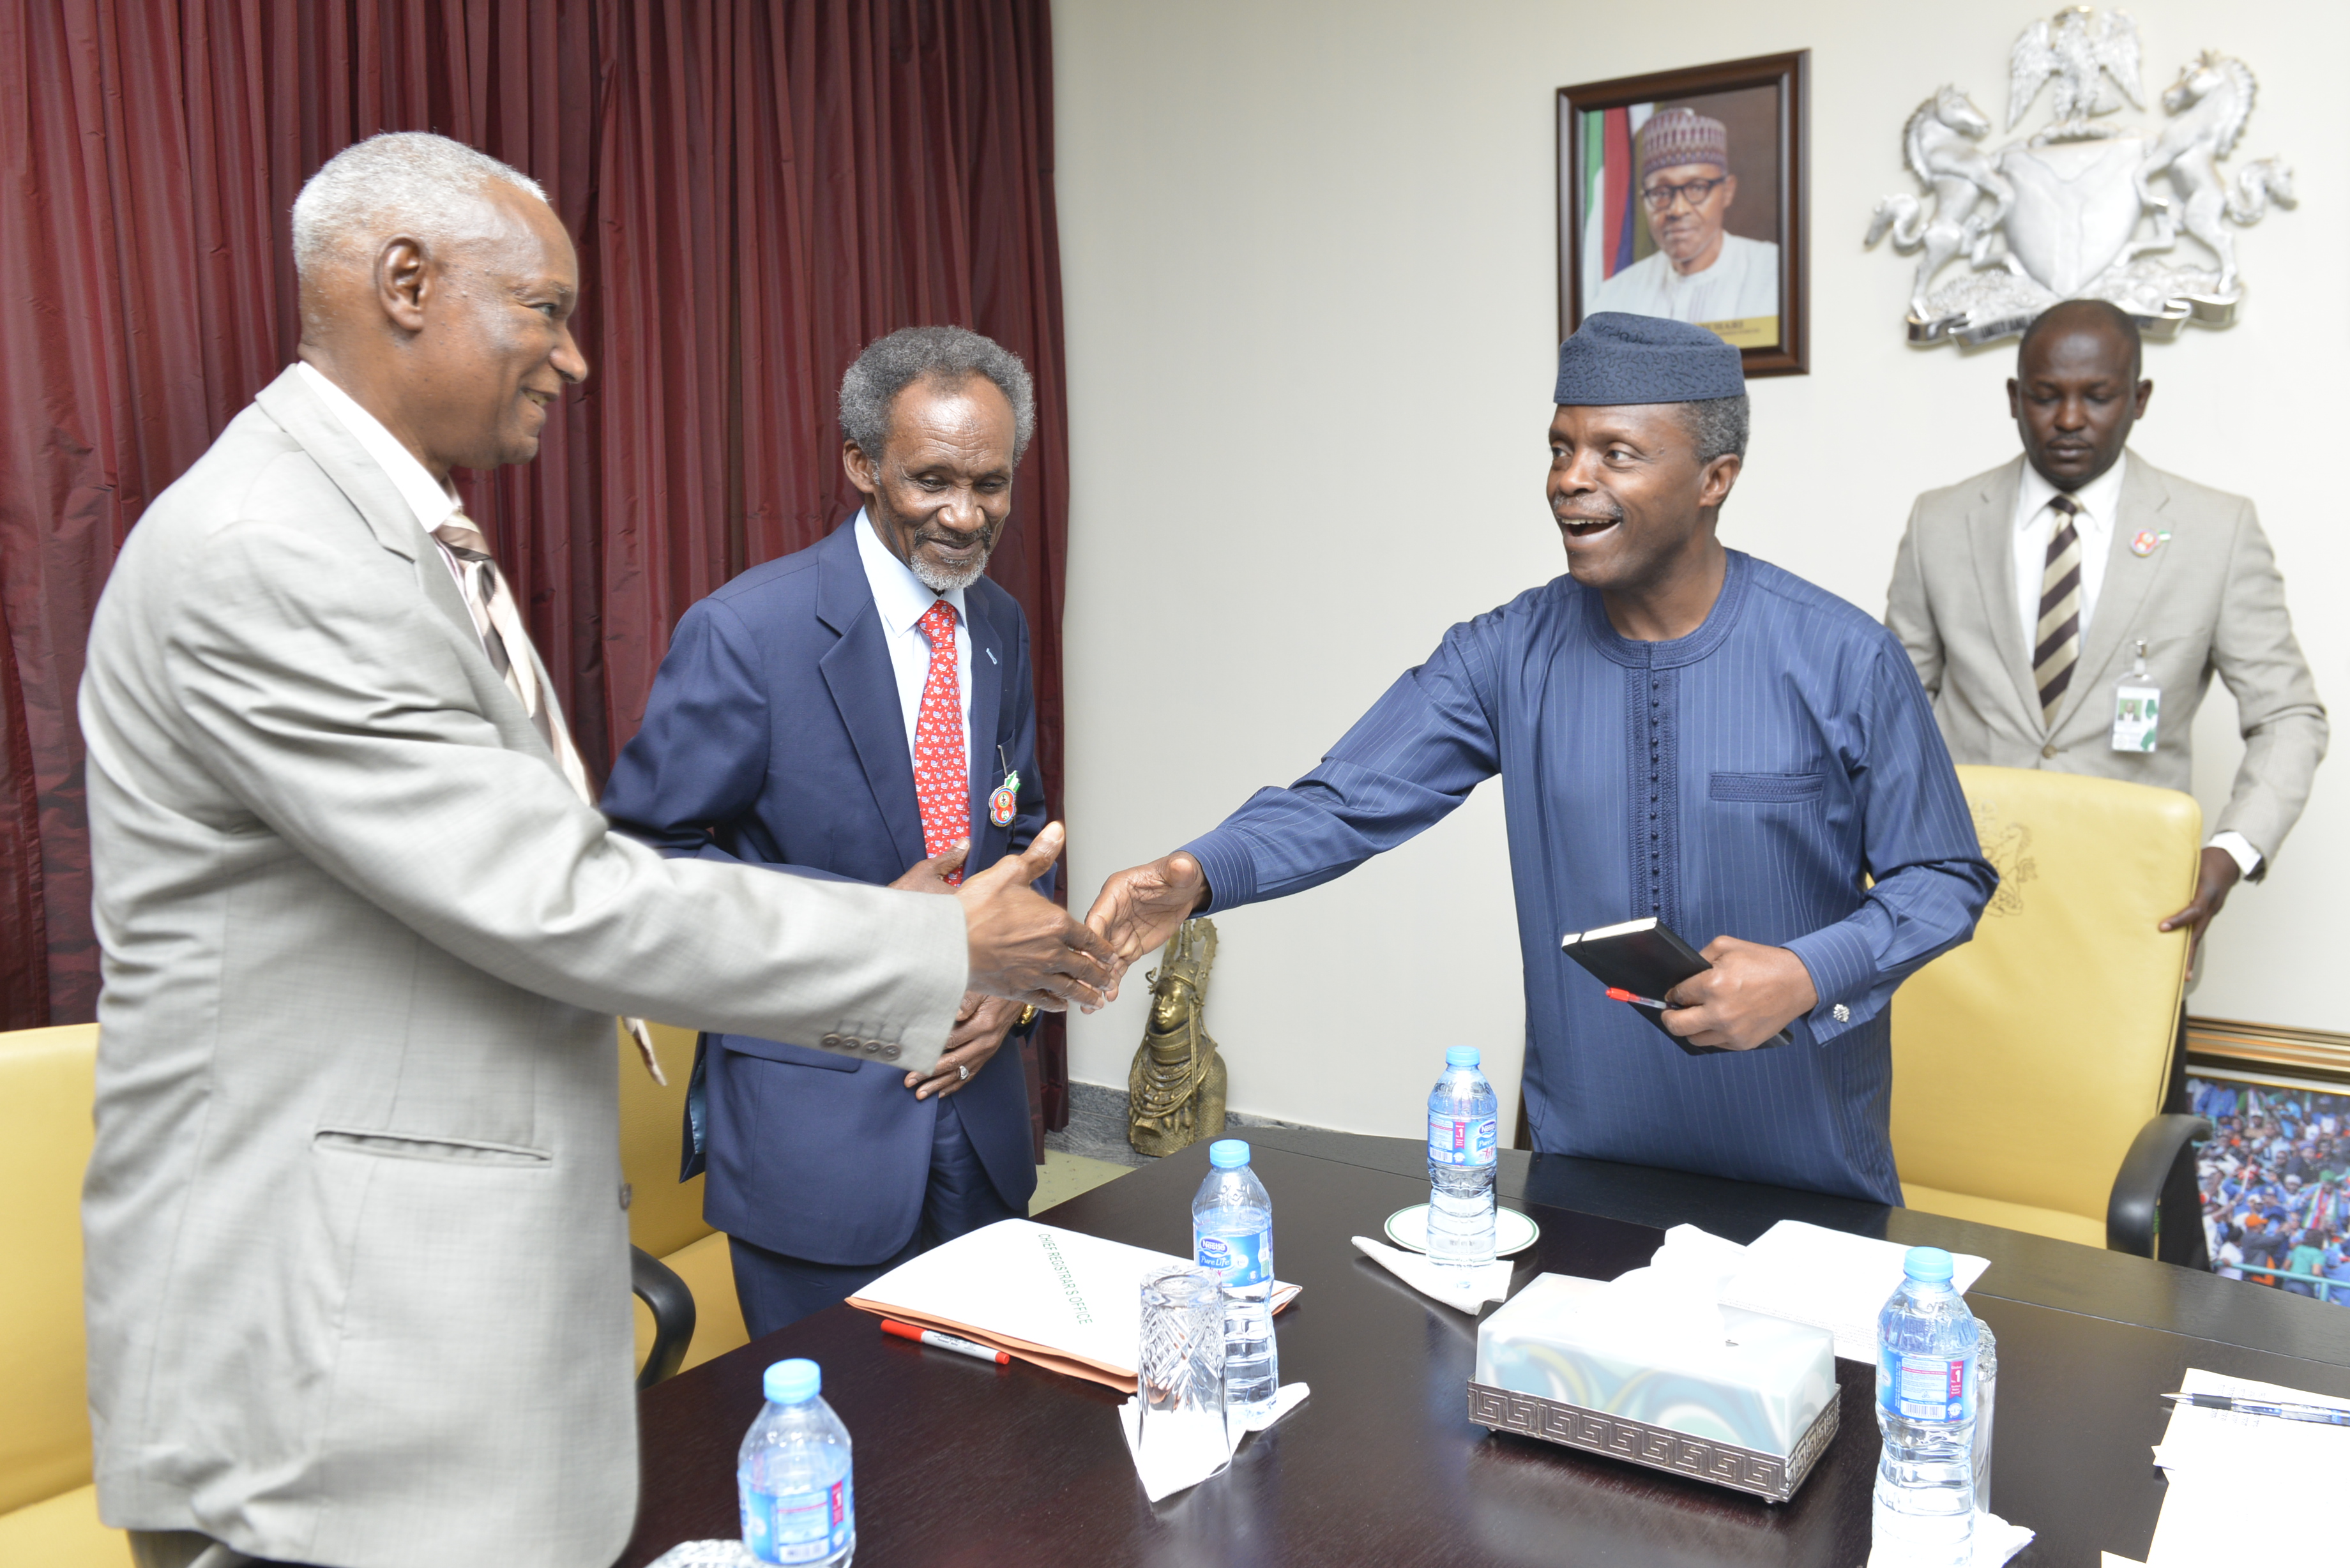 Courtesy Visit From The Chief Justice Of Nigeria On 08/12/2015